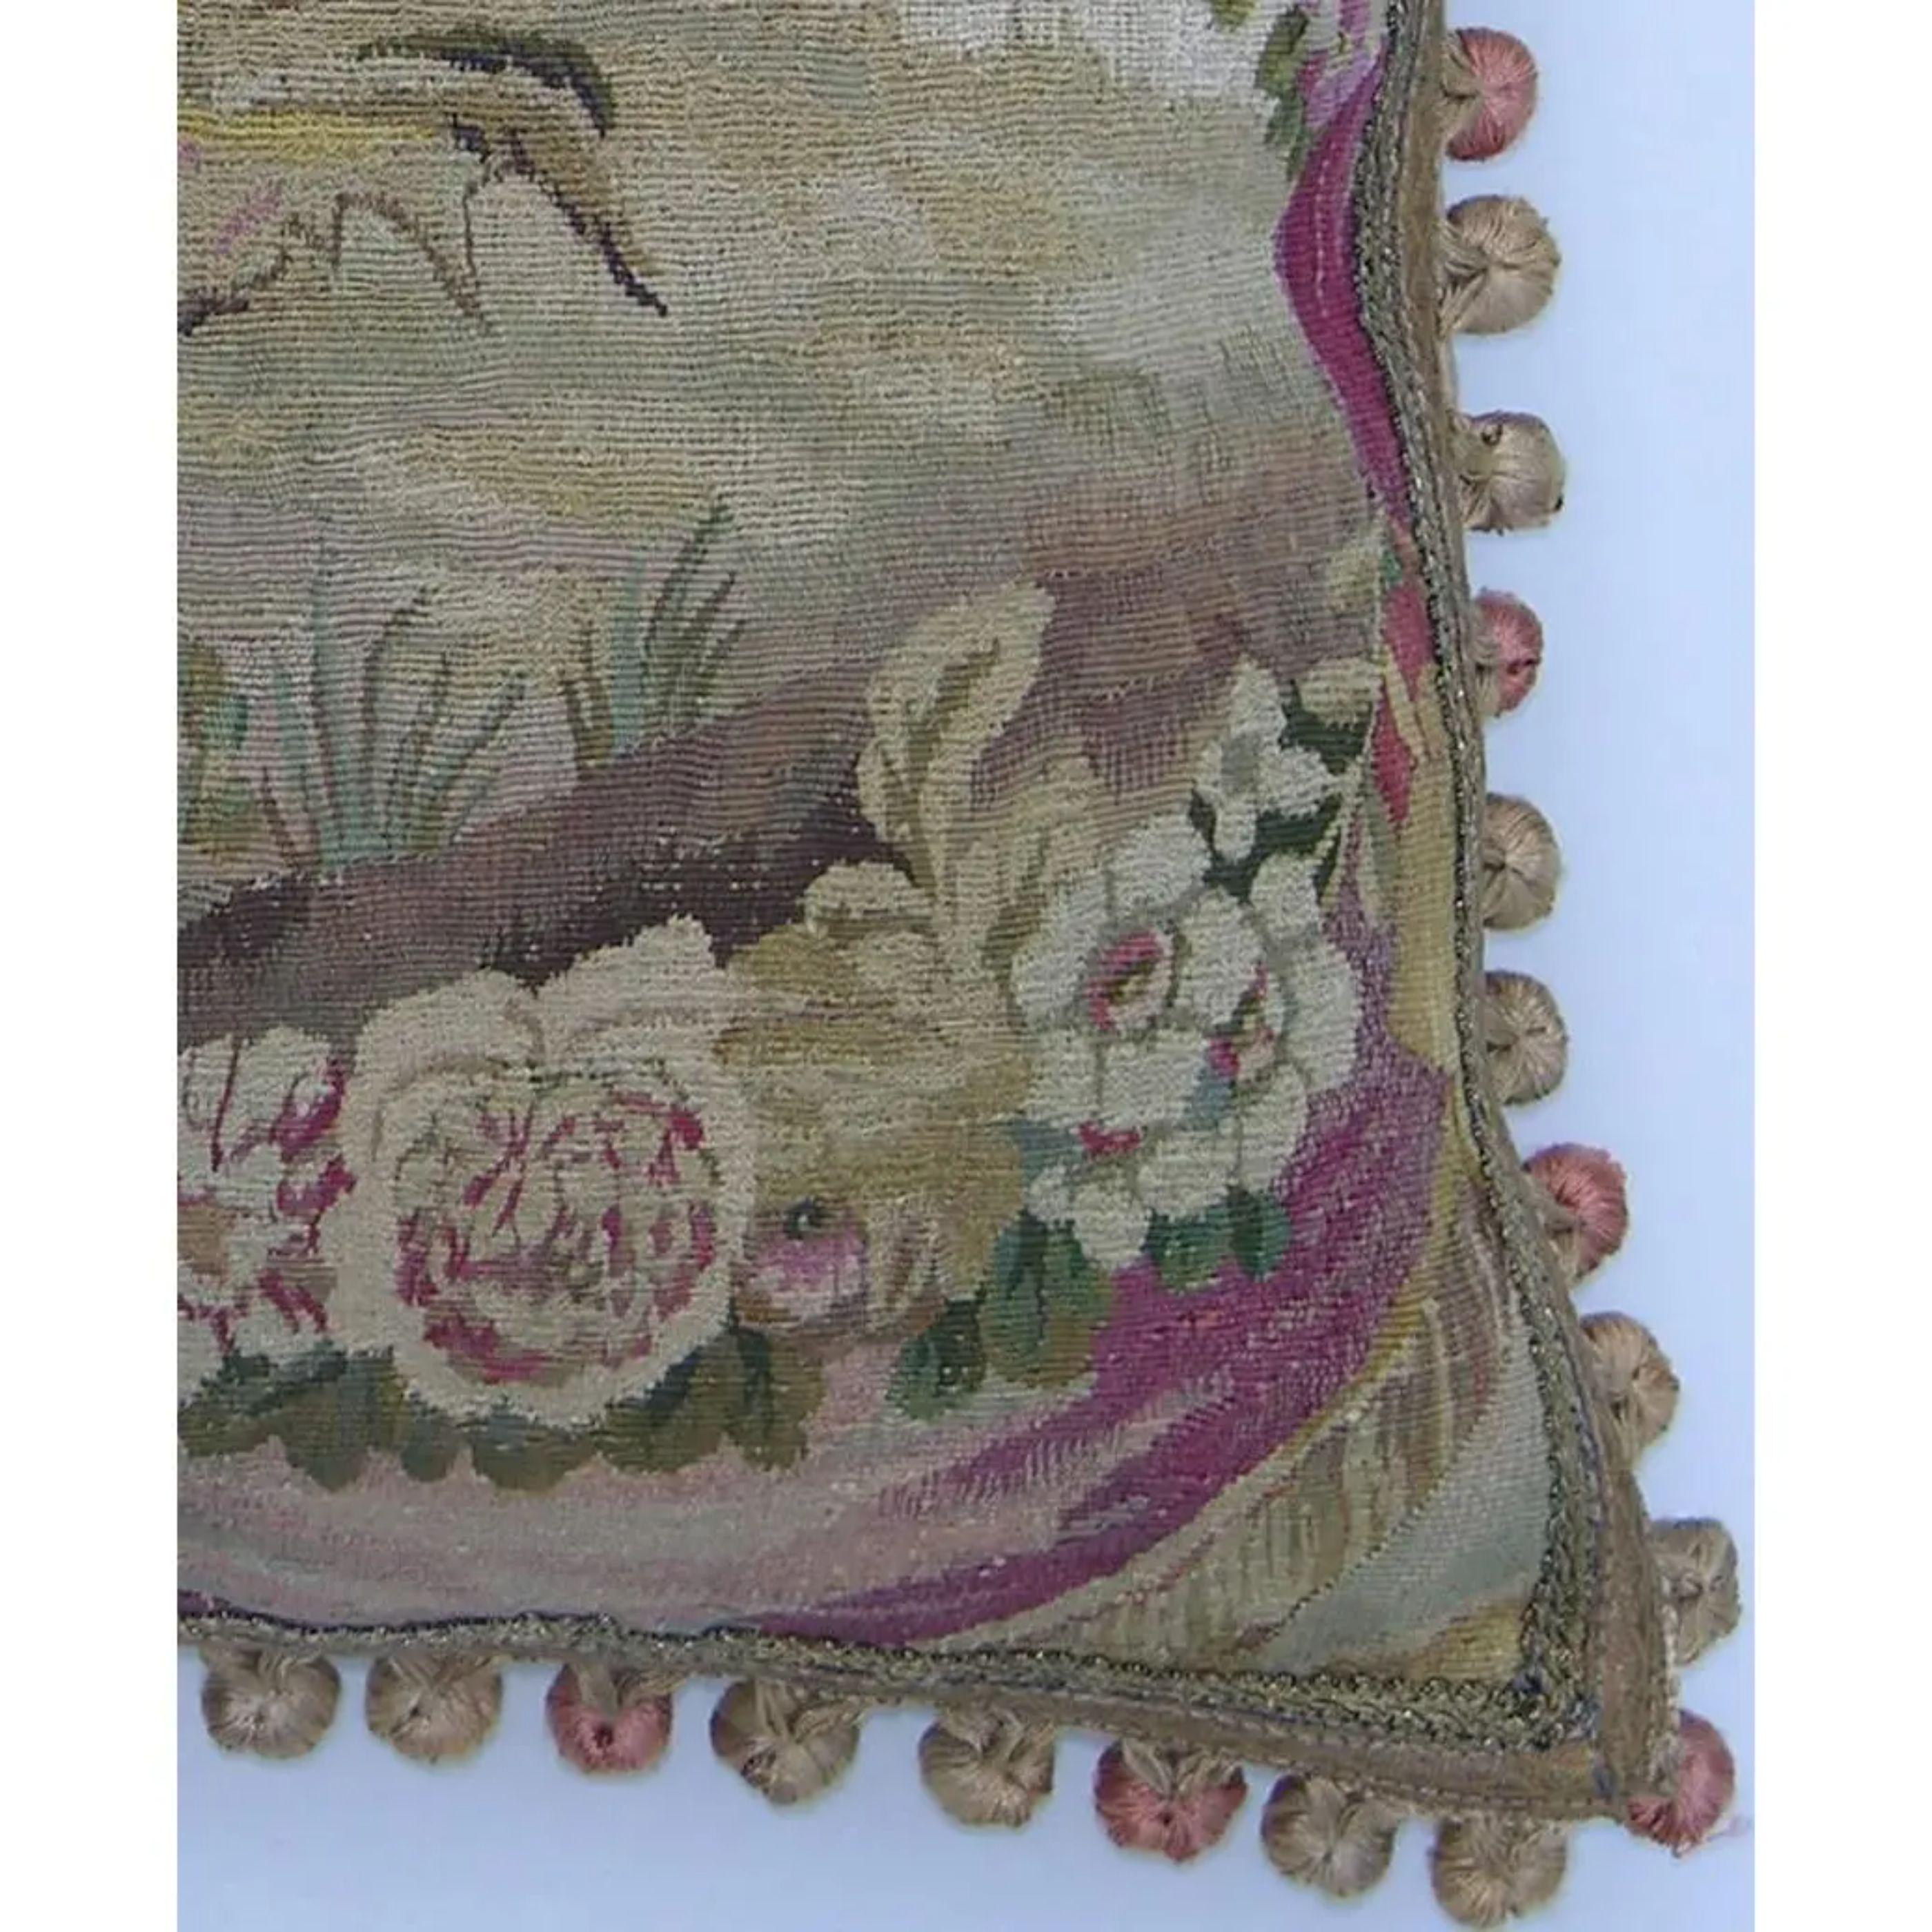 Ca.1820 antique French tapestry pillow 23'' x 22''. Handmade and features needlework.
